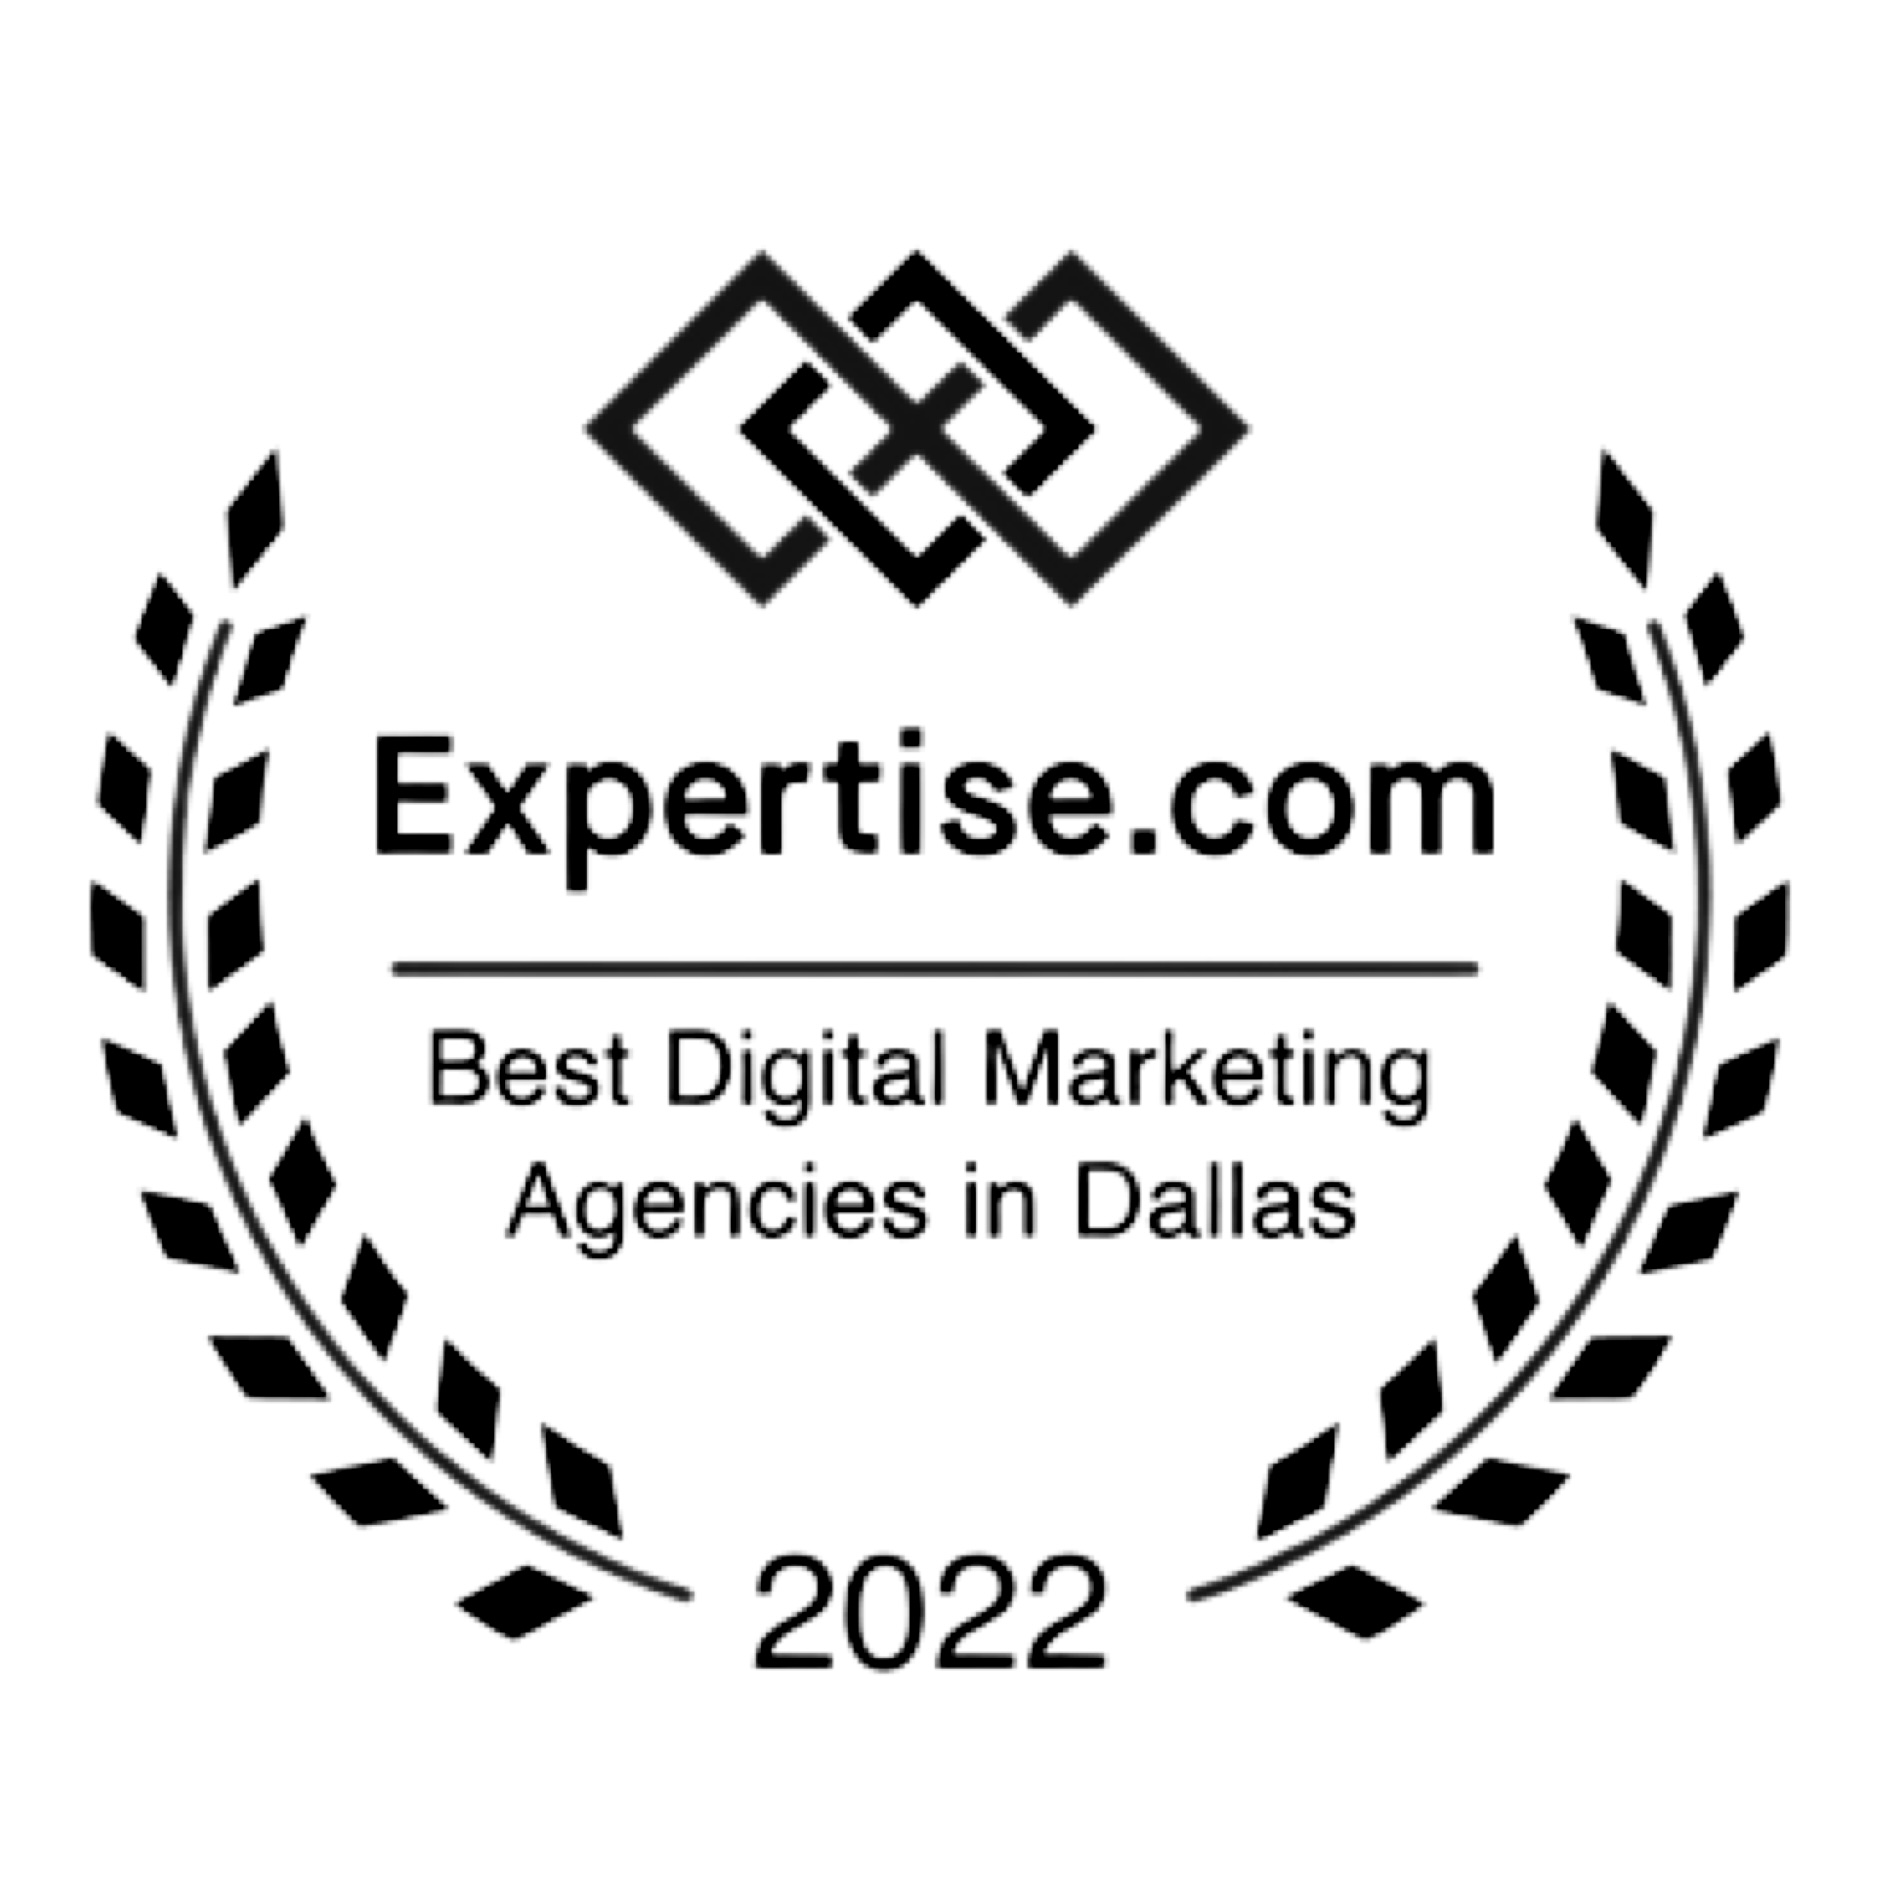 United States 营销公司 Altered State Productions 获得了 Best Digital Marketing Agencies in Dallas - Expertise.,9’ 奖项